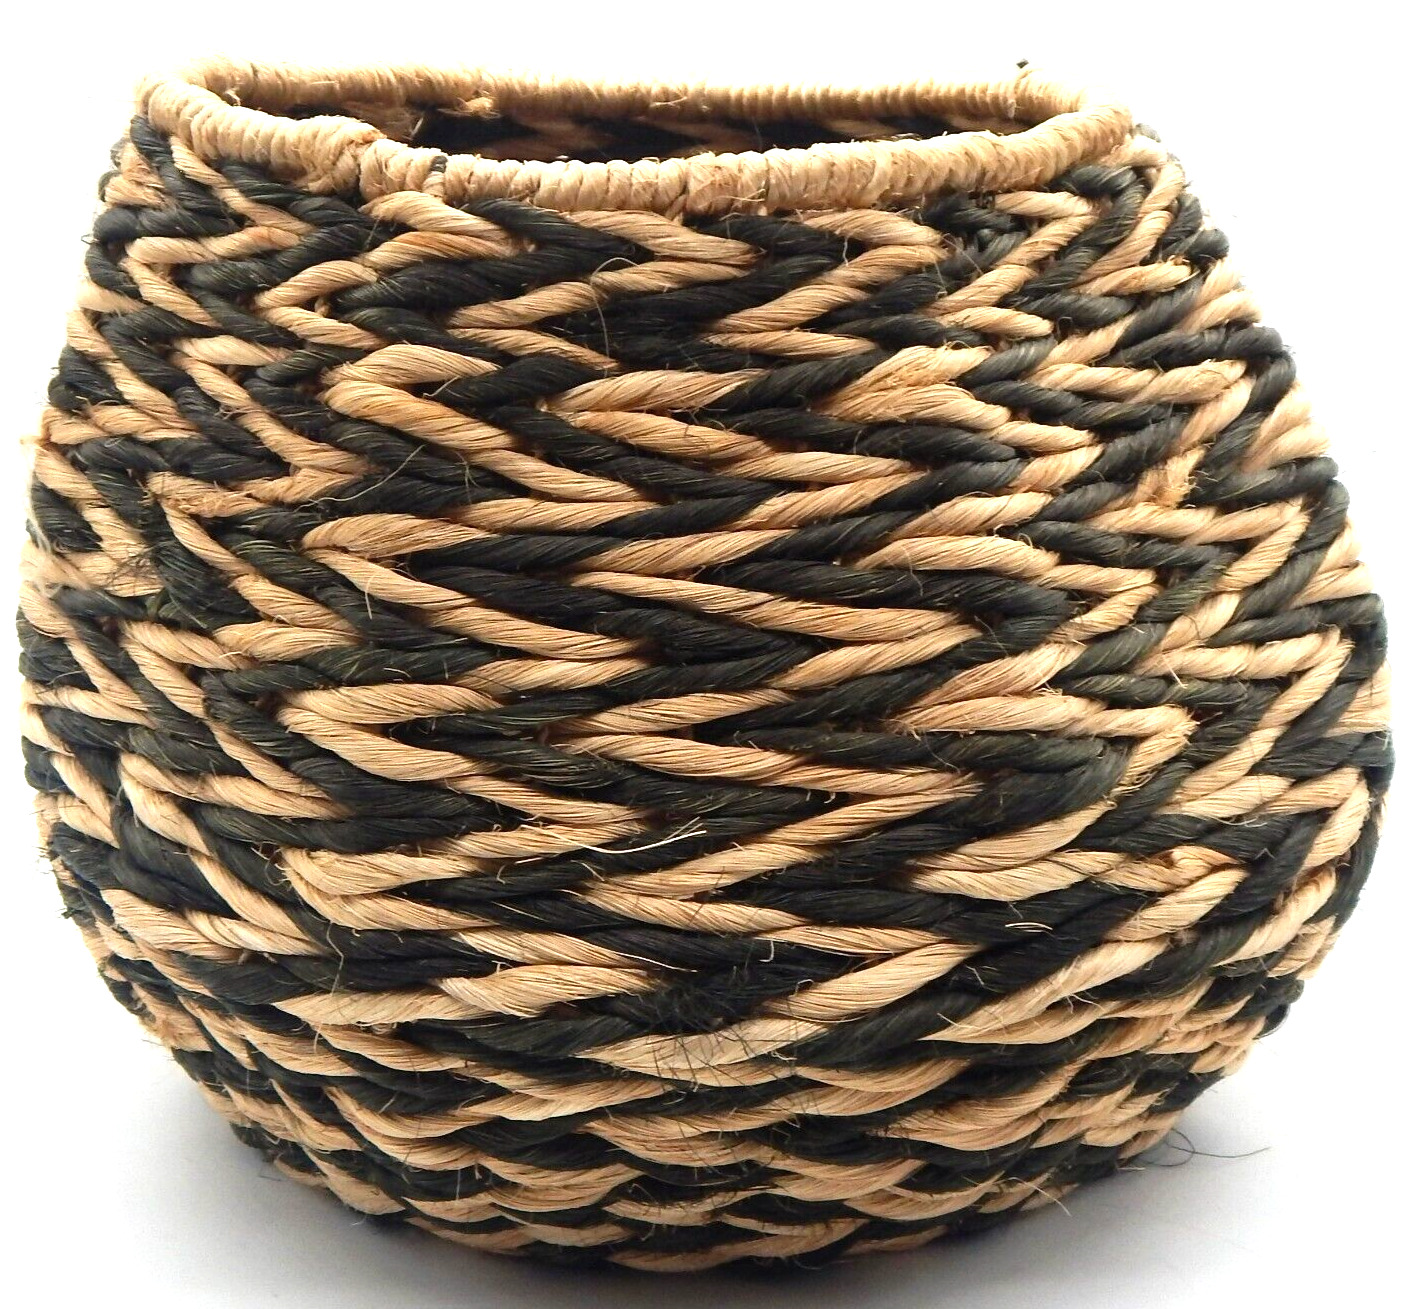 Large Soft Hand Woven Non Rigid Snake Charmer Coiled Rope 12x14 Style Basket